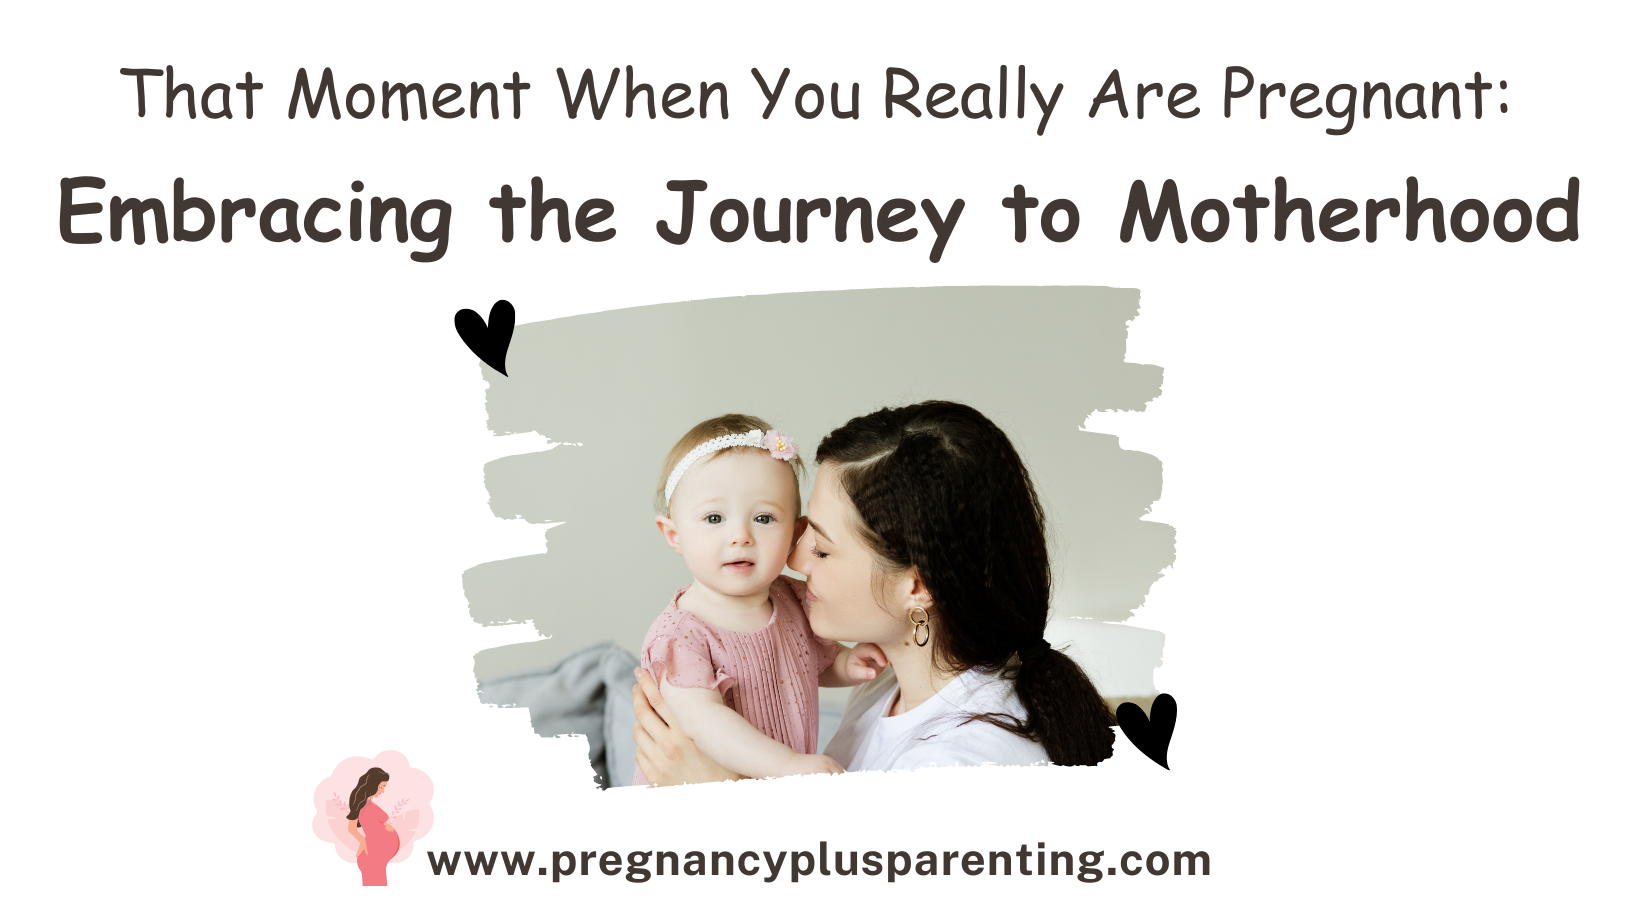 That Moment When You Really Are Pregnant: Embracing the Journey to Motherhood